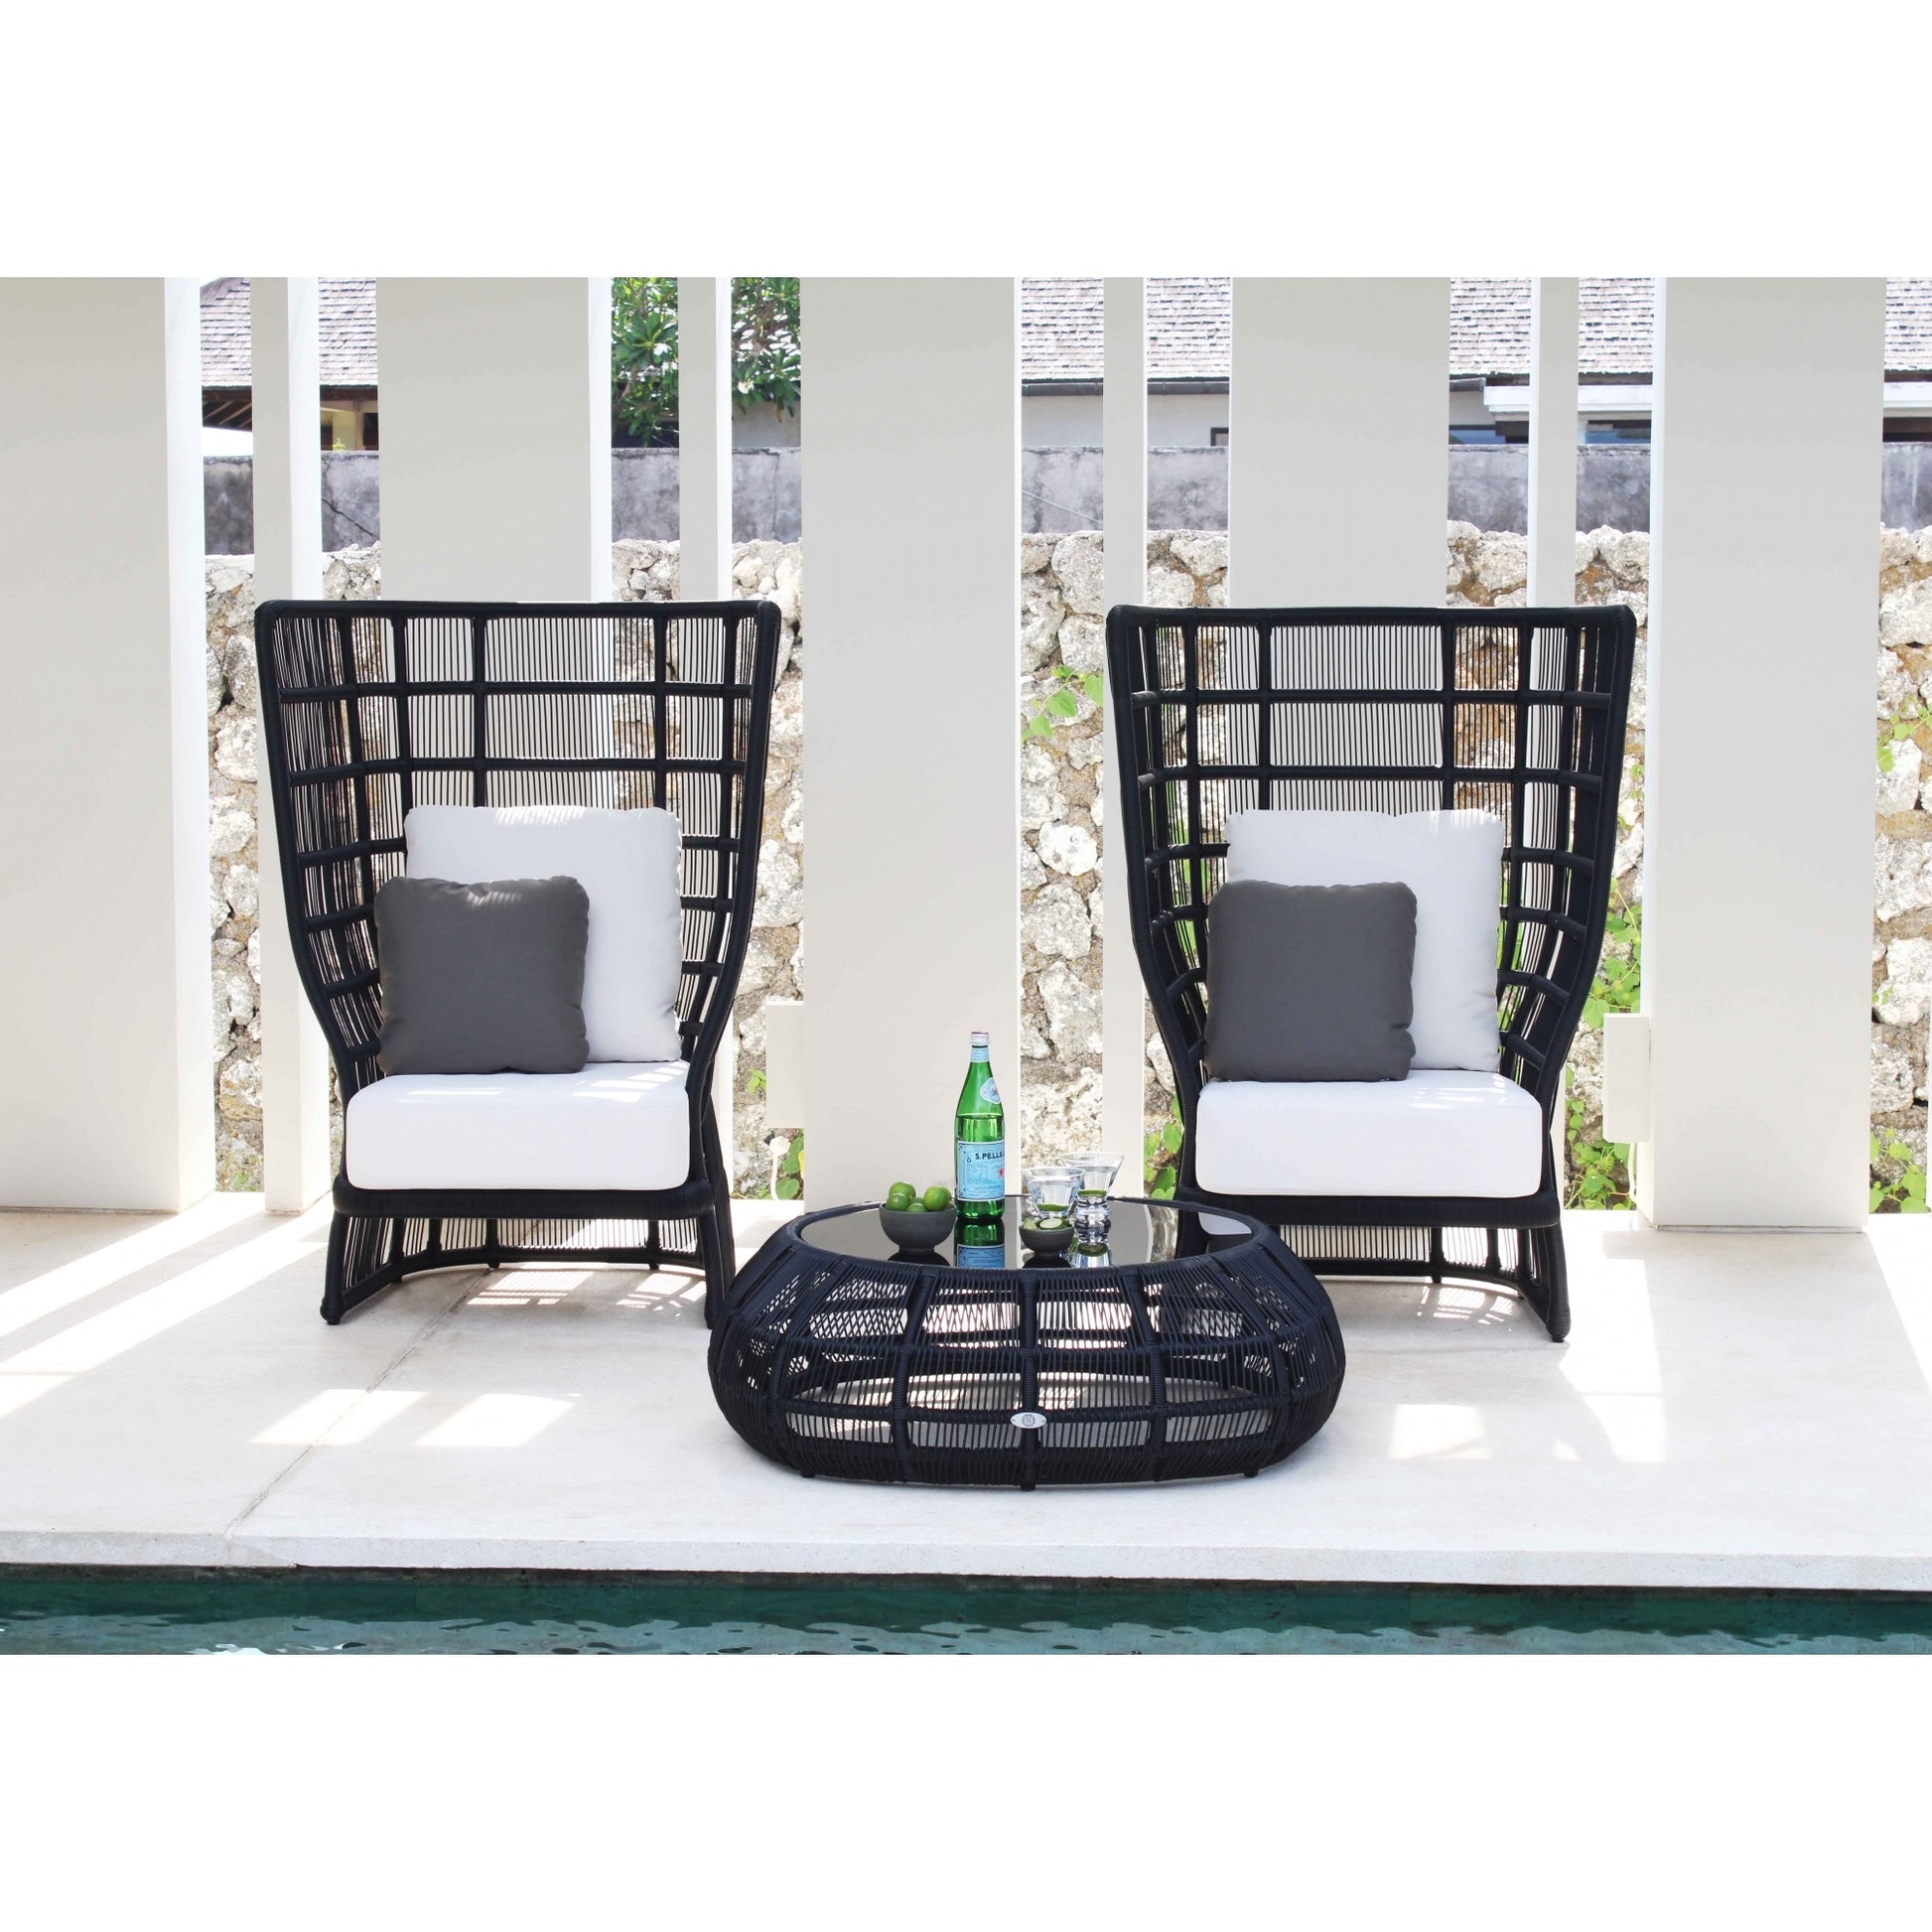 Spa Chair - PadioLiving - Spa Chair - Outdoor Chair - PadioLiving